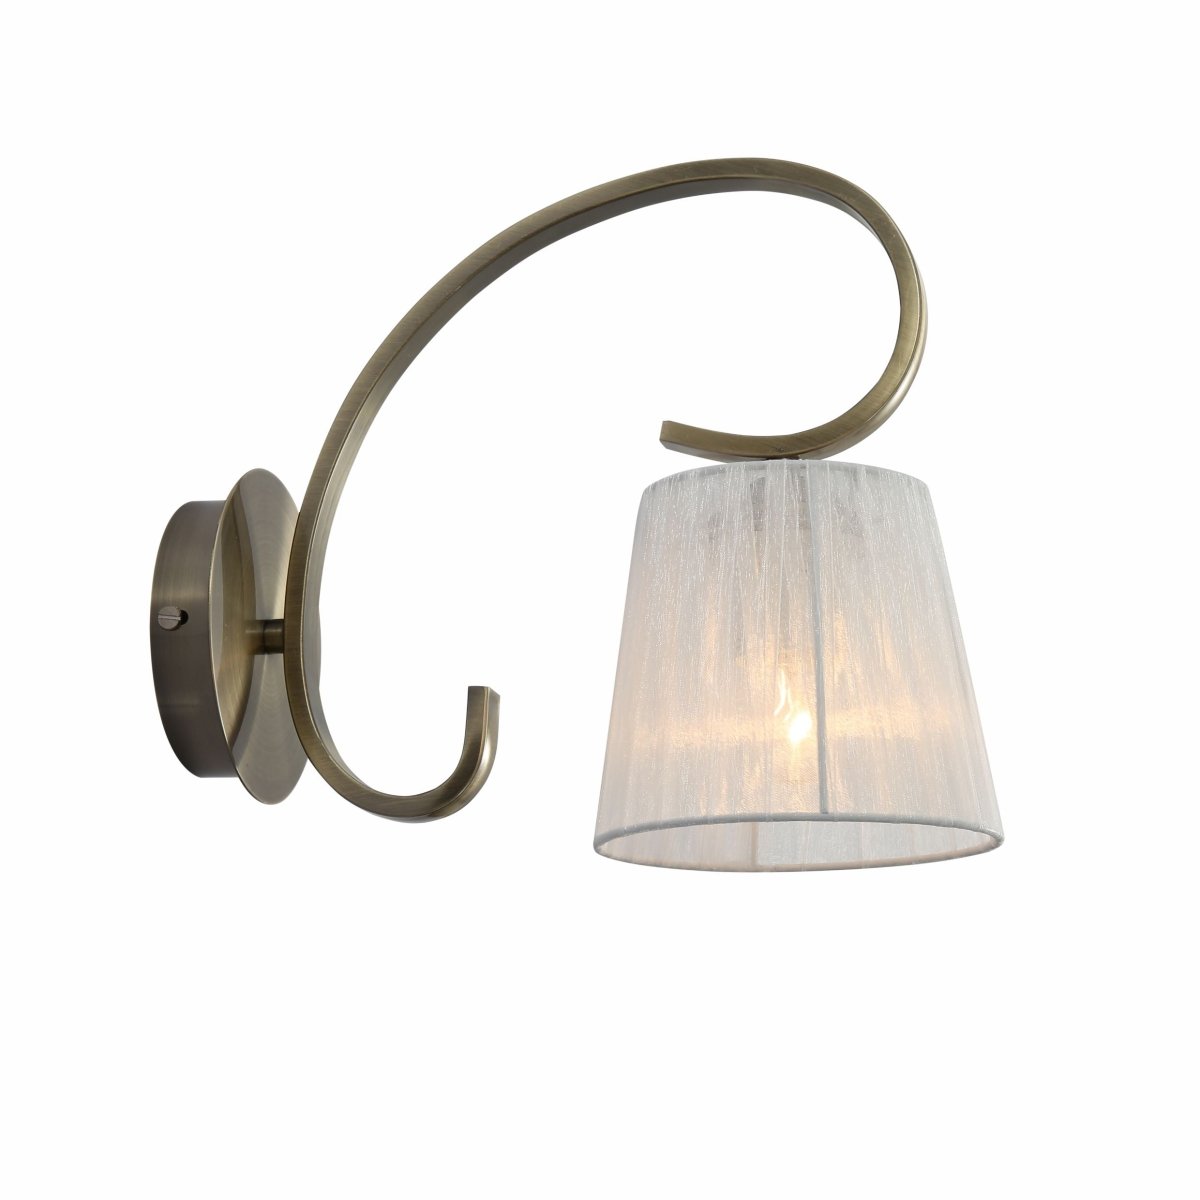 Main image of Antique Brass Metal Body Rice White Fabric Shade Lantern Vintage Traditional Retro Wall Light with E27 Fitting | TEKLED 151-19812